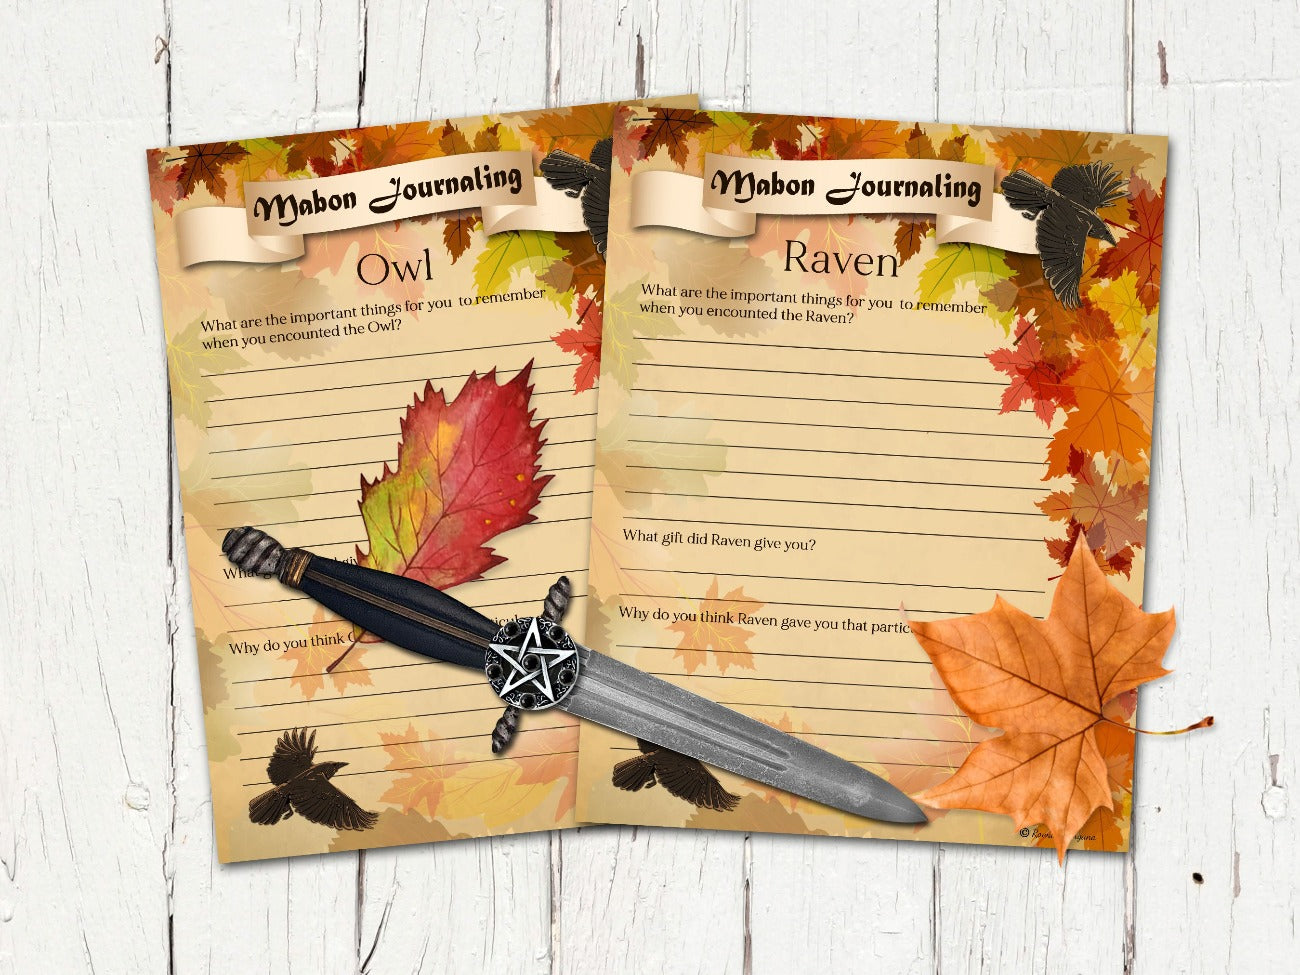 MABON GUIDED MEDITATION 12 Pages, Autumn Equinox Ritual Magic, Wicca Sabbat Witchcraft, Pagan Thanksgiving,  worksheets for Covens & groups - Morgana Magick Spell